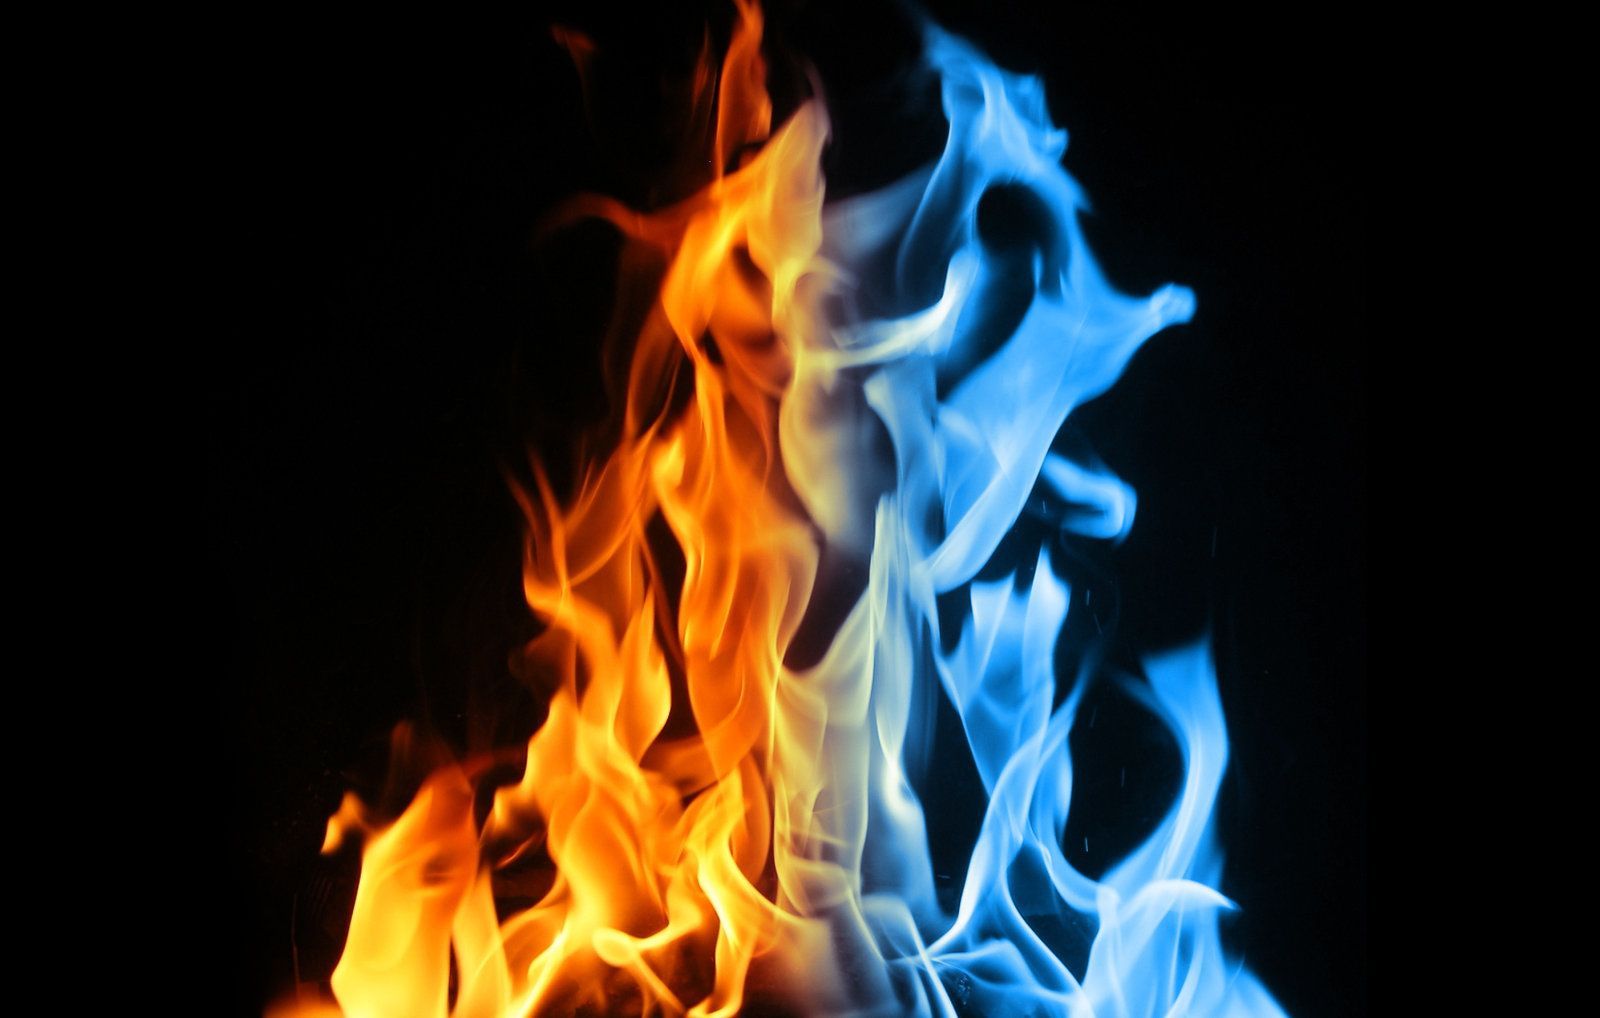 Fire and Ice Image. Fire and ice, Ice picture, Fire art